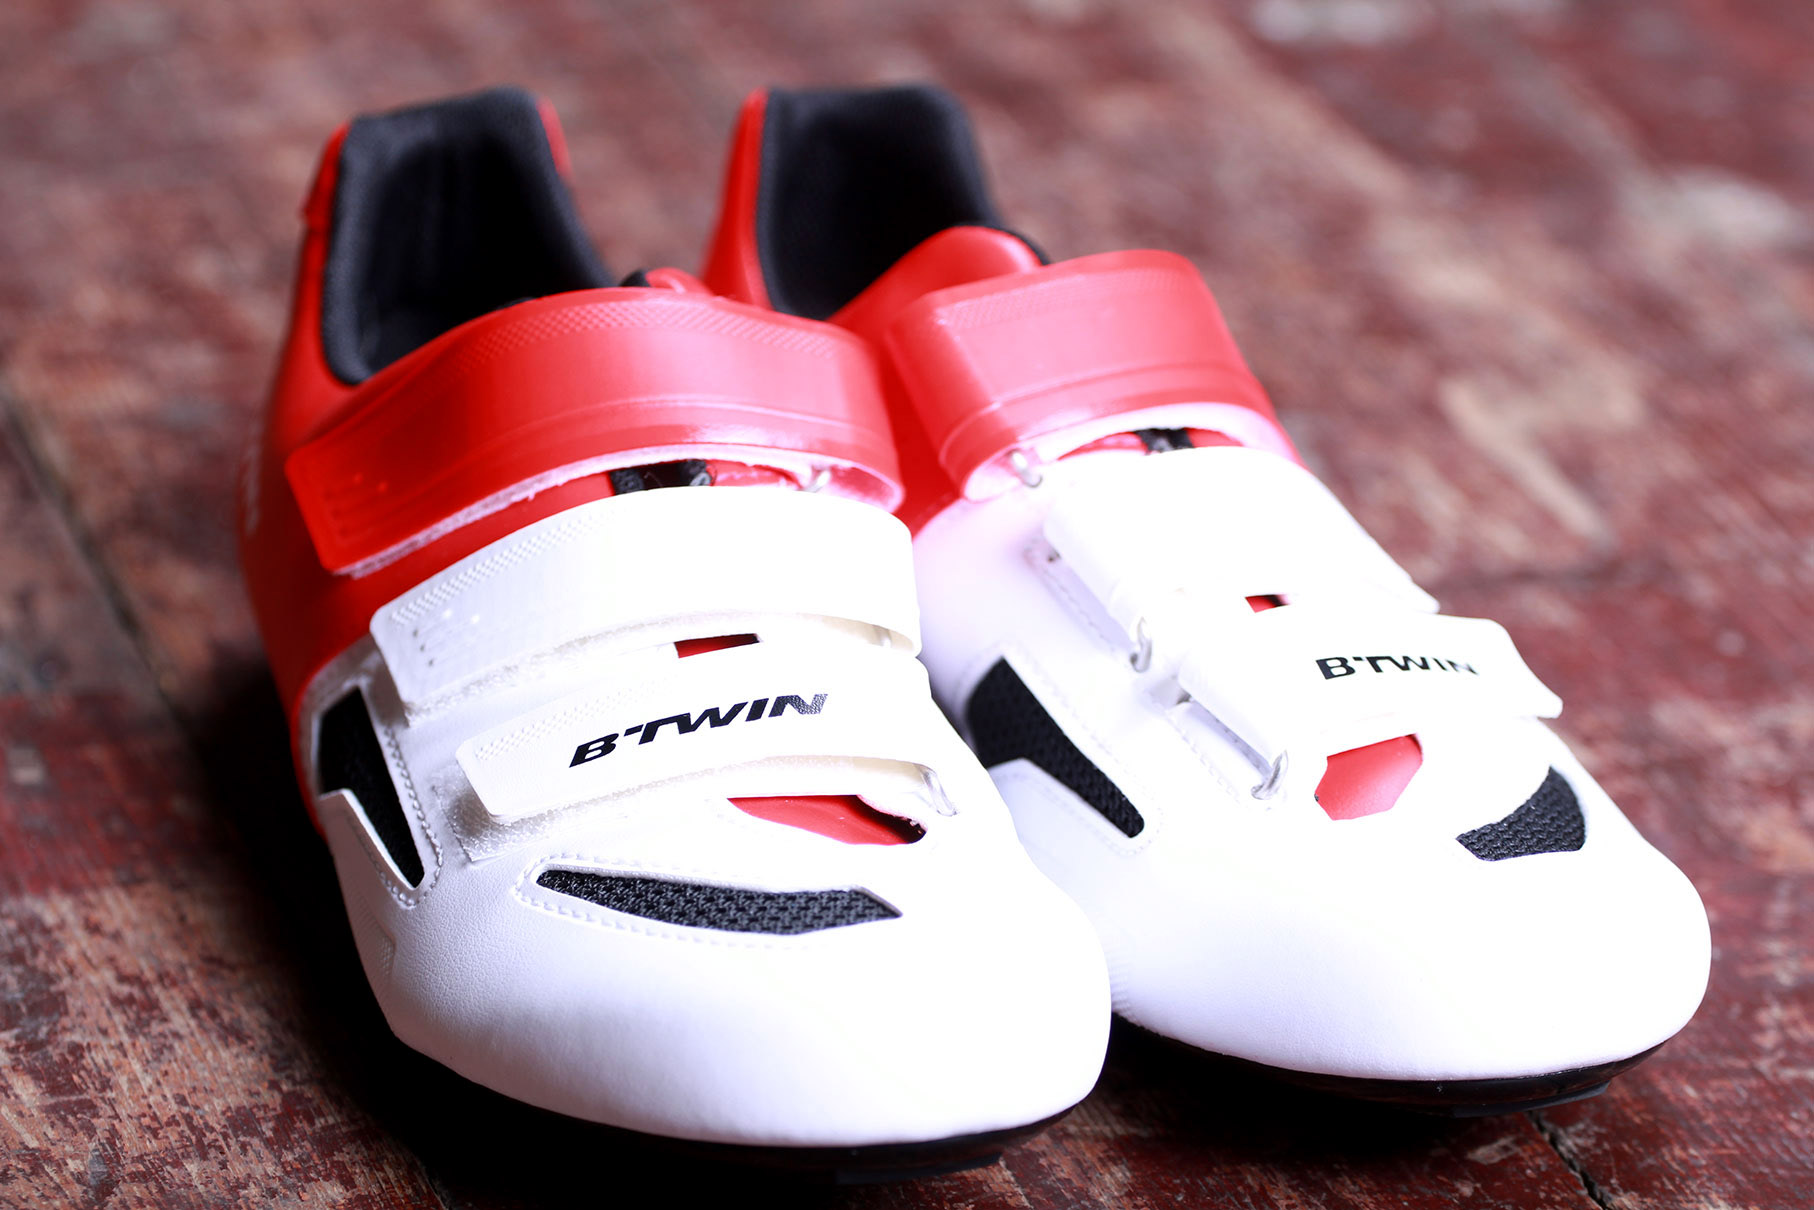 btwin spd shoes